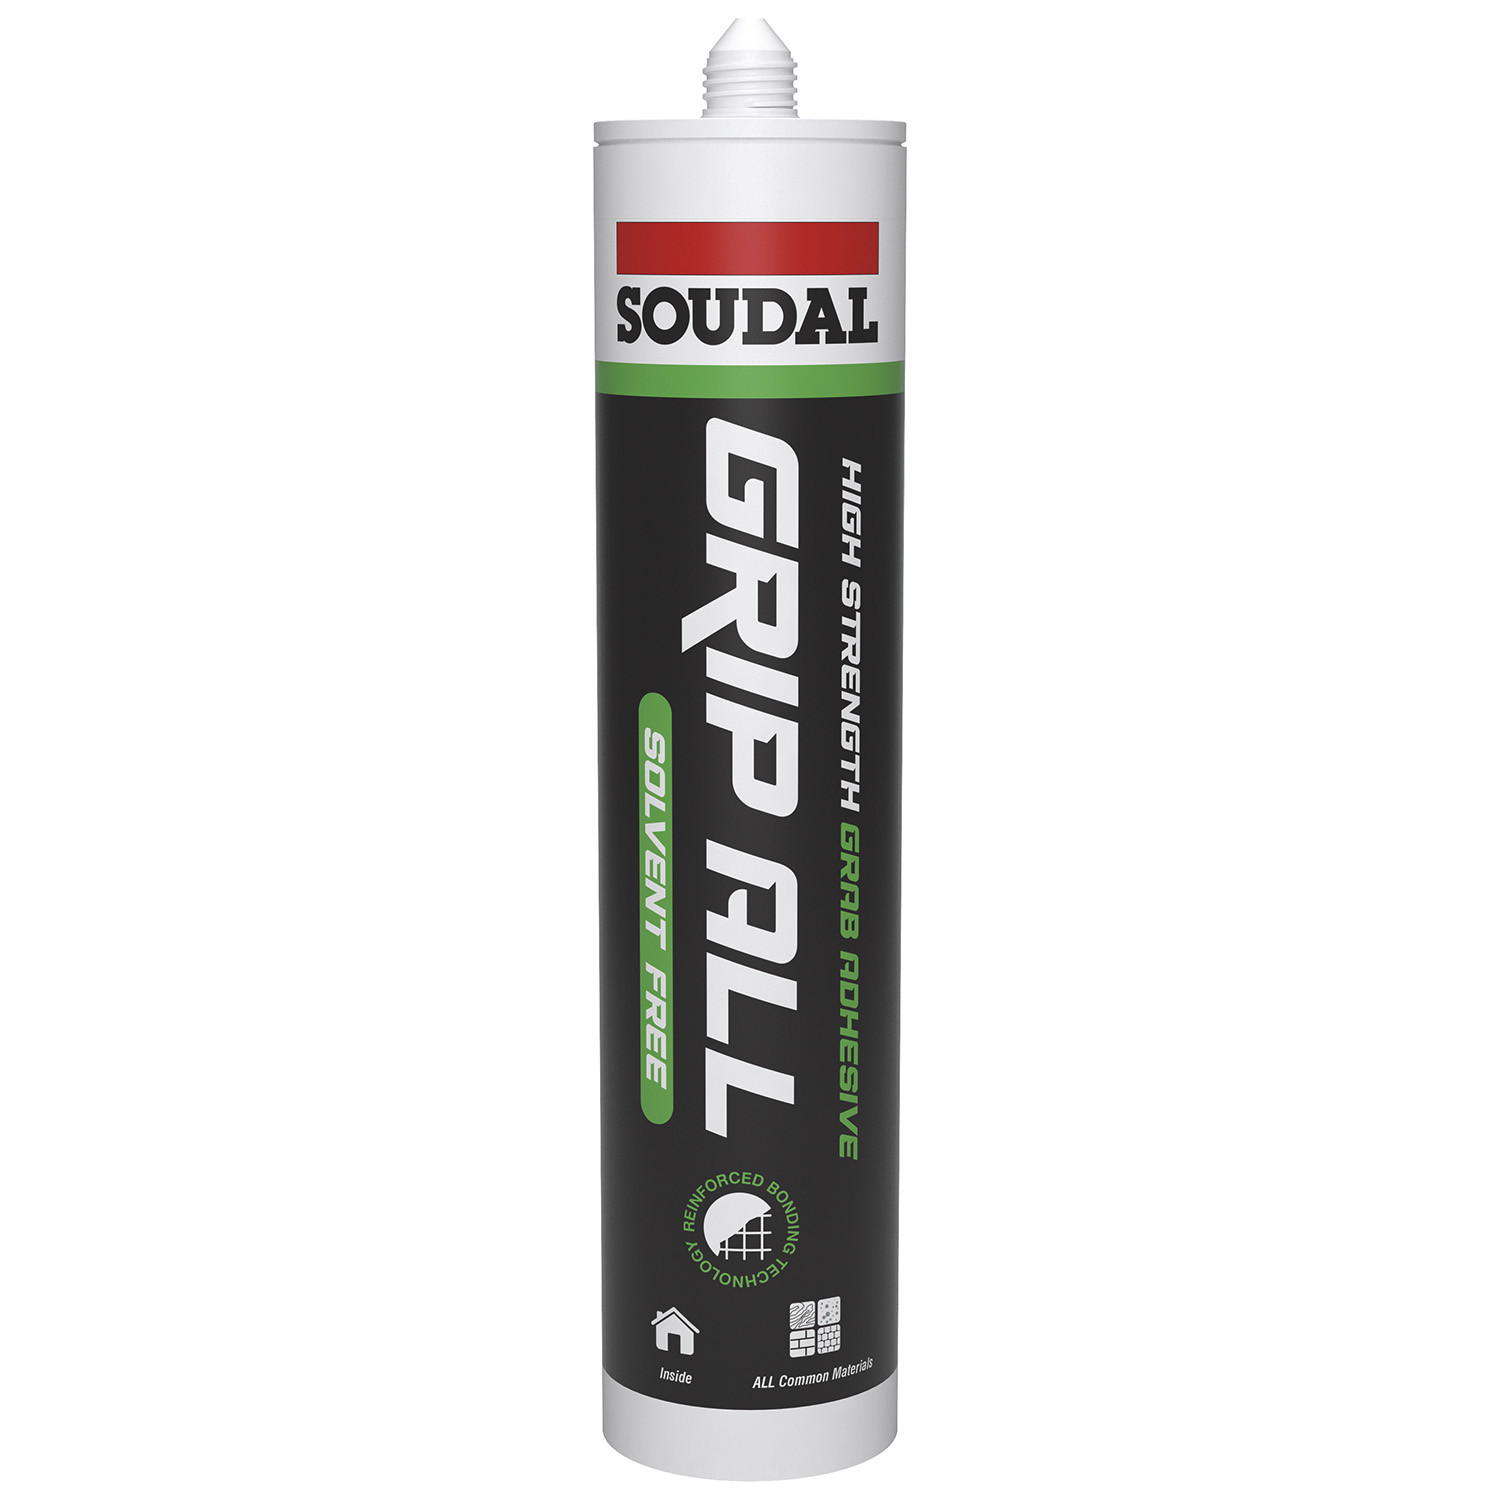 Soudal Grip All Solvent Free Adhesive Image